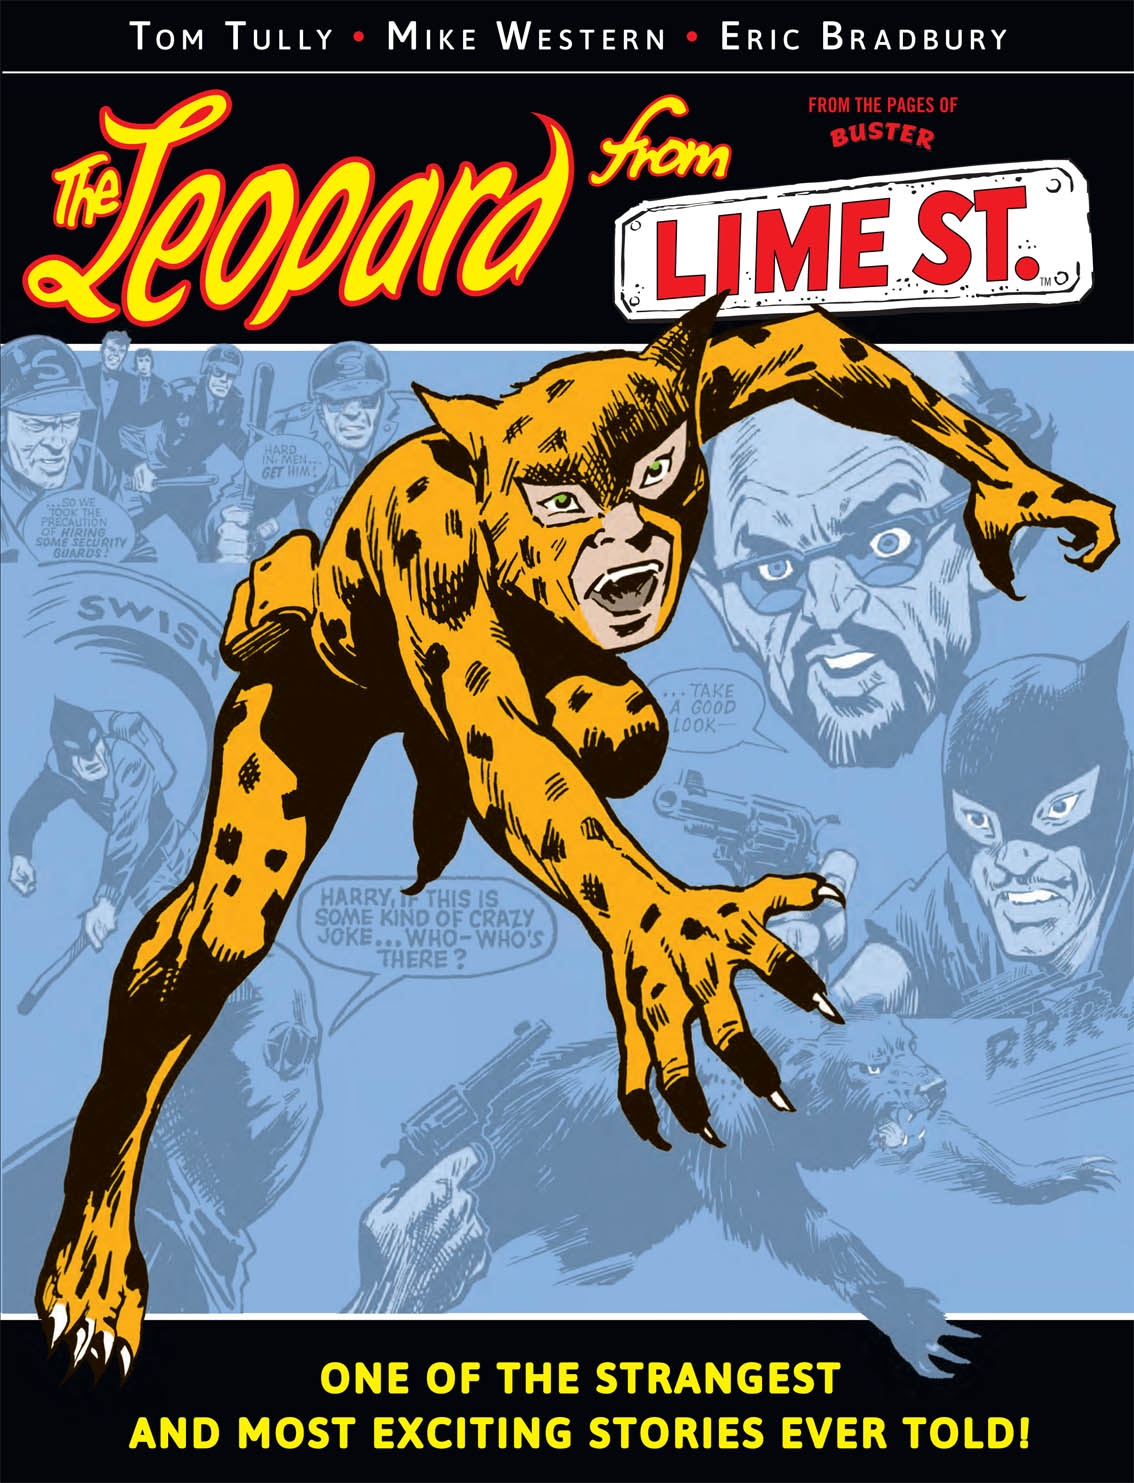 The Leopard From Lime St.